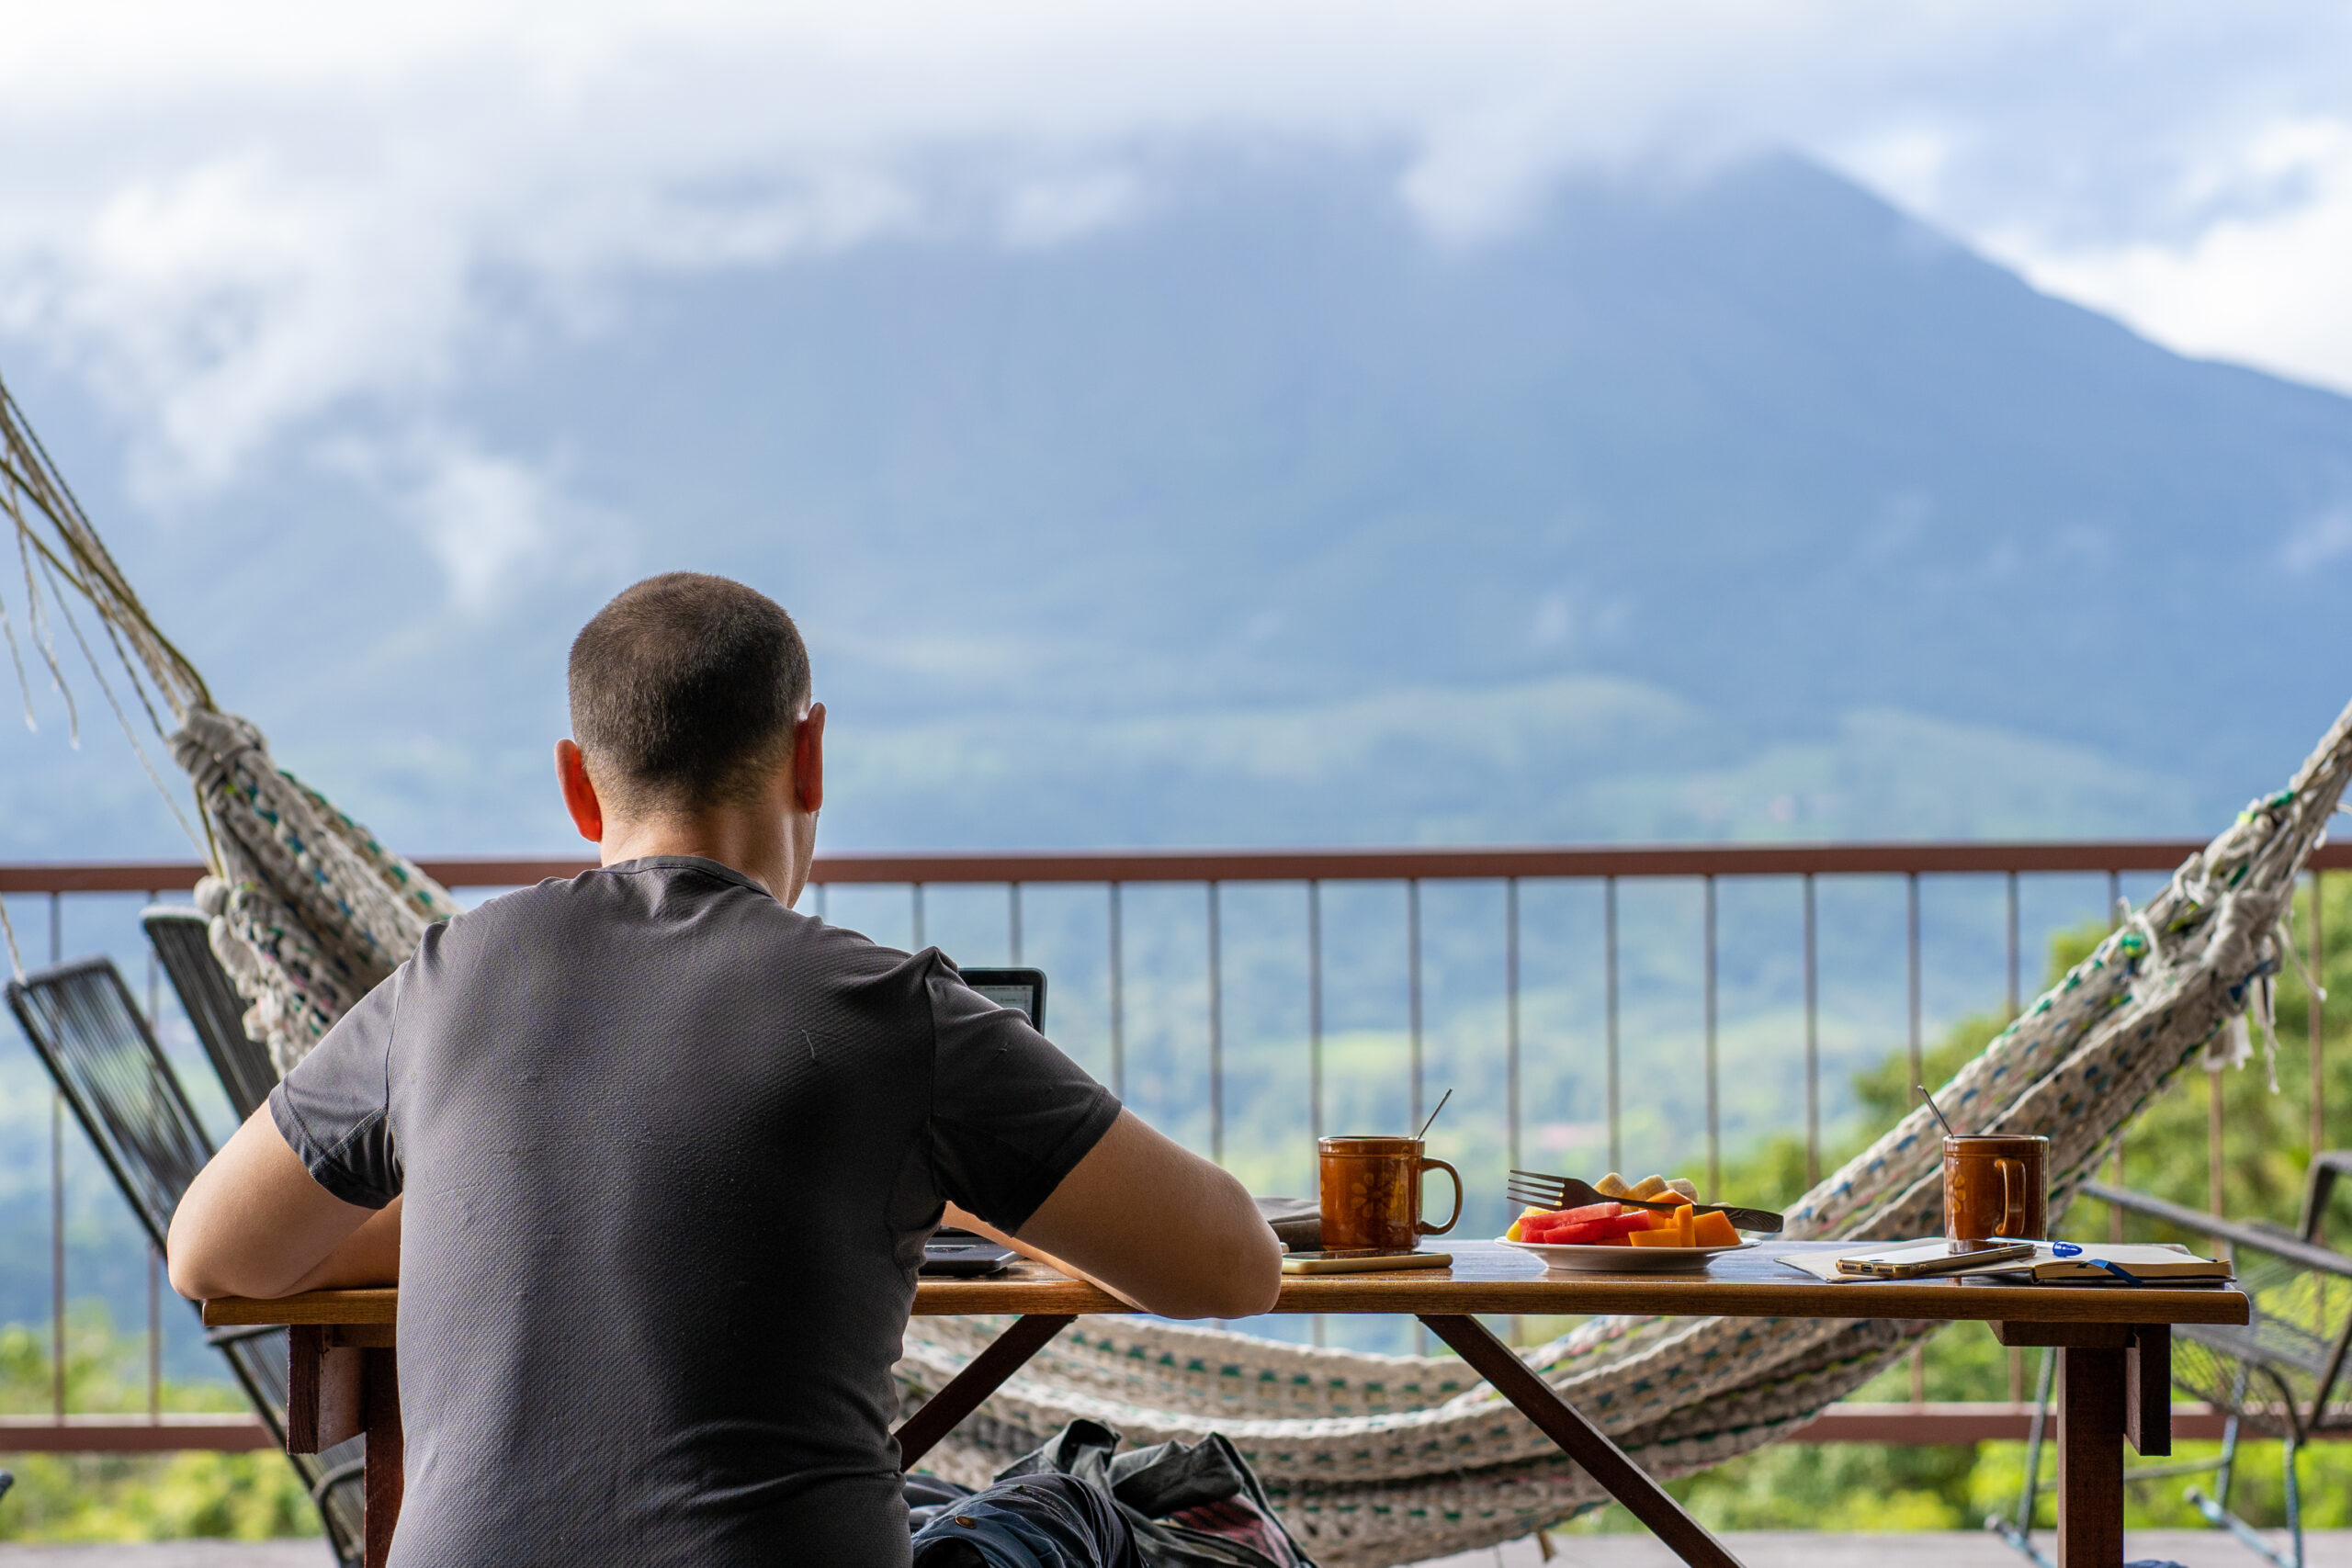 <p>When we hear “remote work,” we think of this remote worker. Digital nomads work from anywhere, leveraging technology like WiFi, smart devices, and cloud-based applications to work from literally anywhere with an internet connection. Working from anywhere allows digital nomads to travel, a massive benefit for many remote workers. </p>